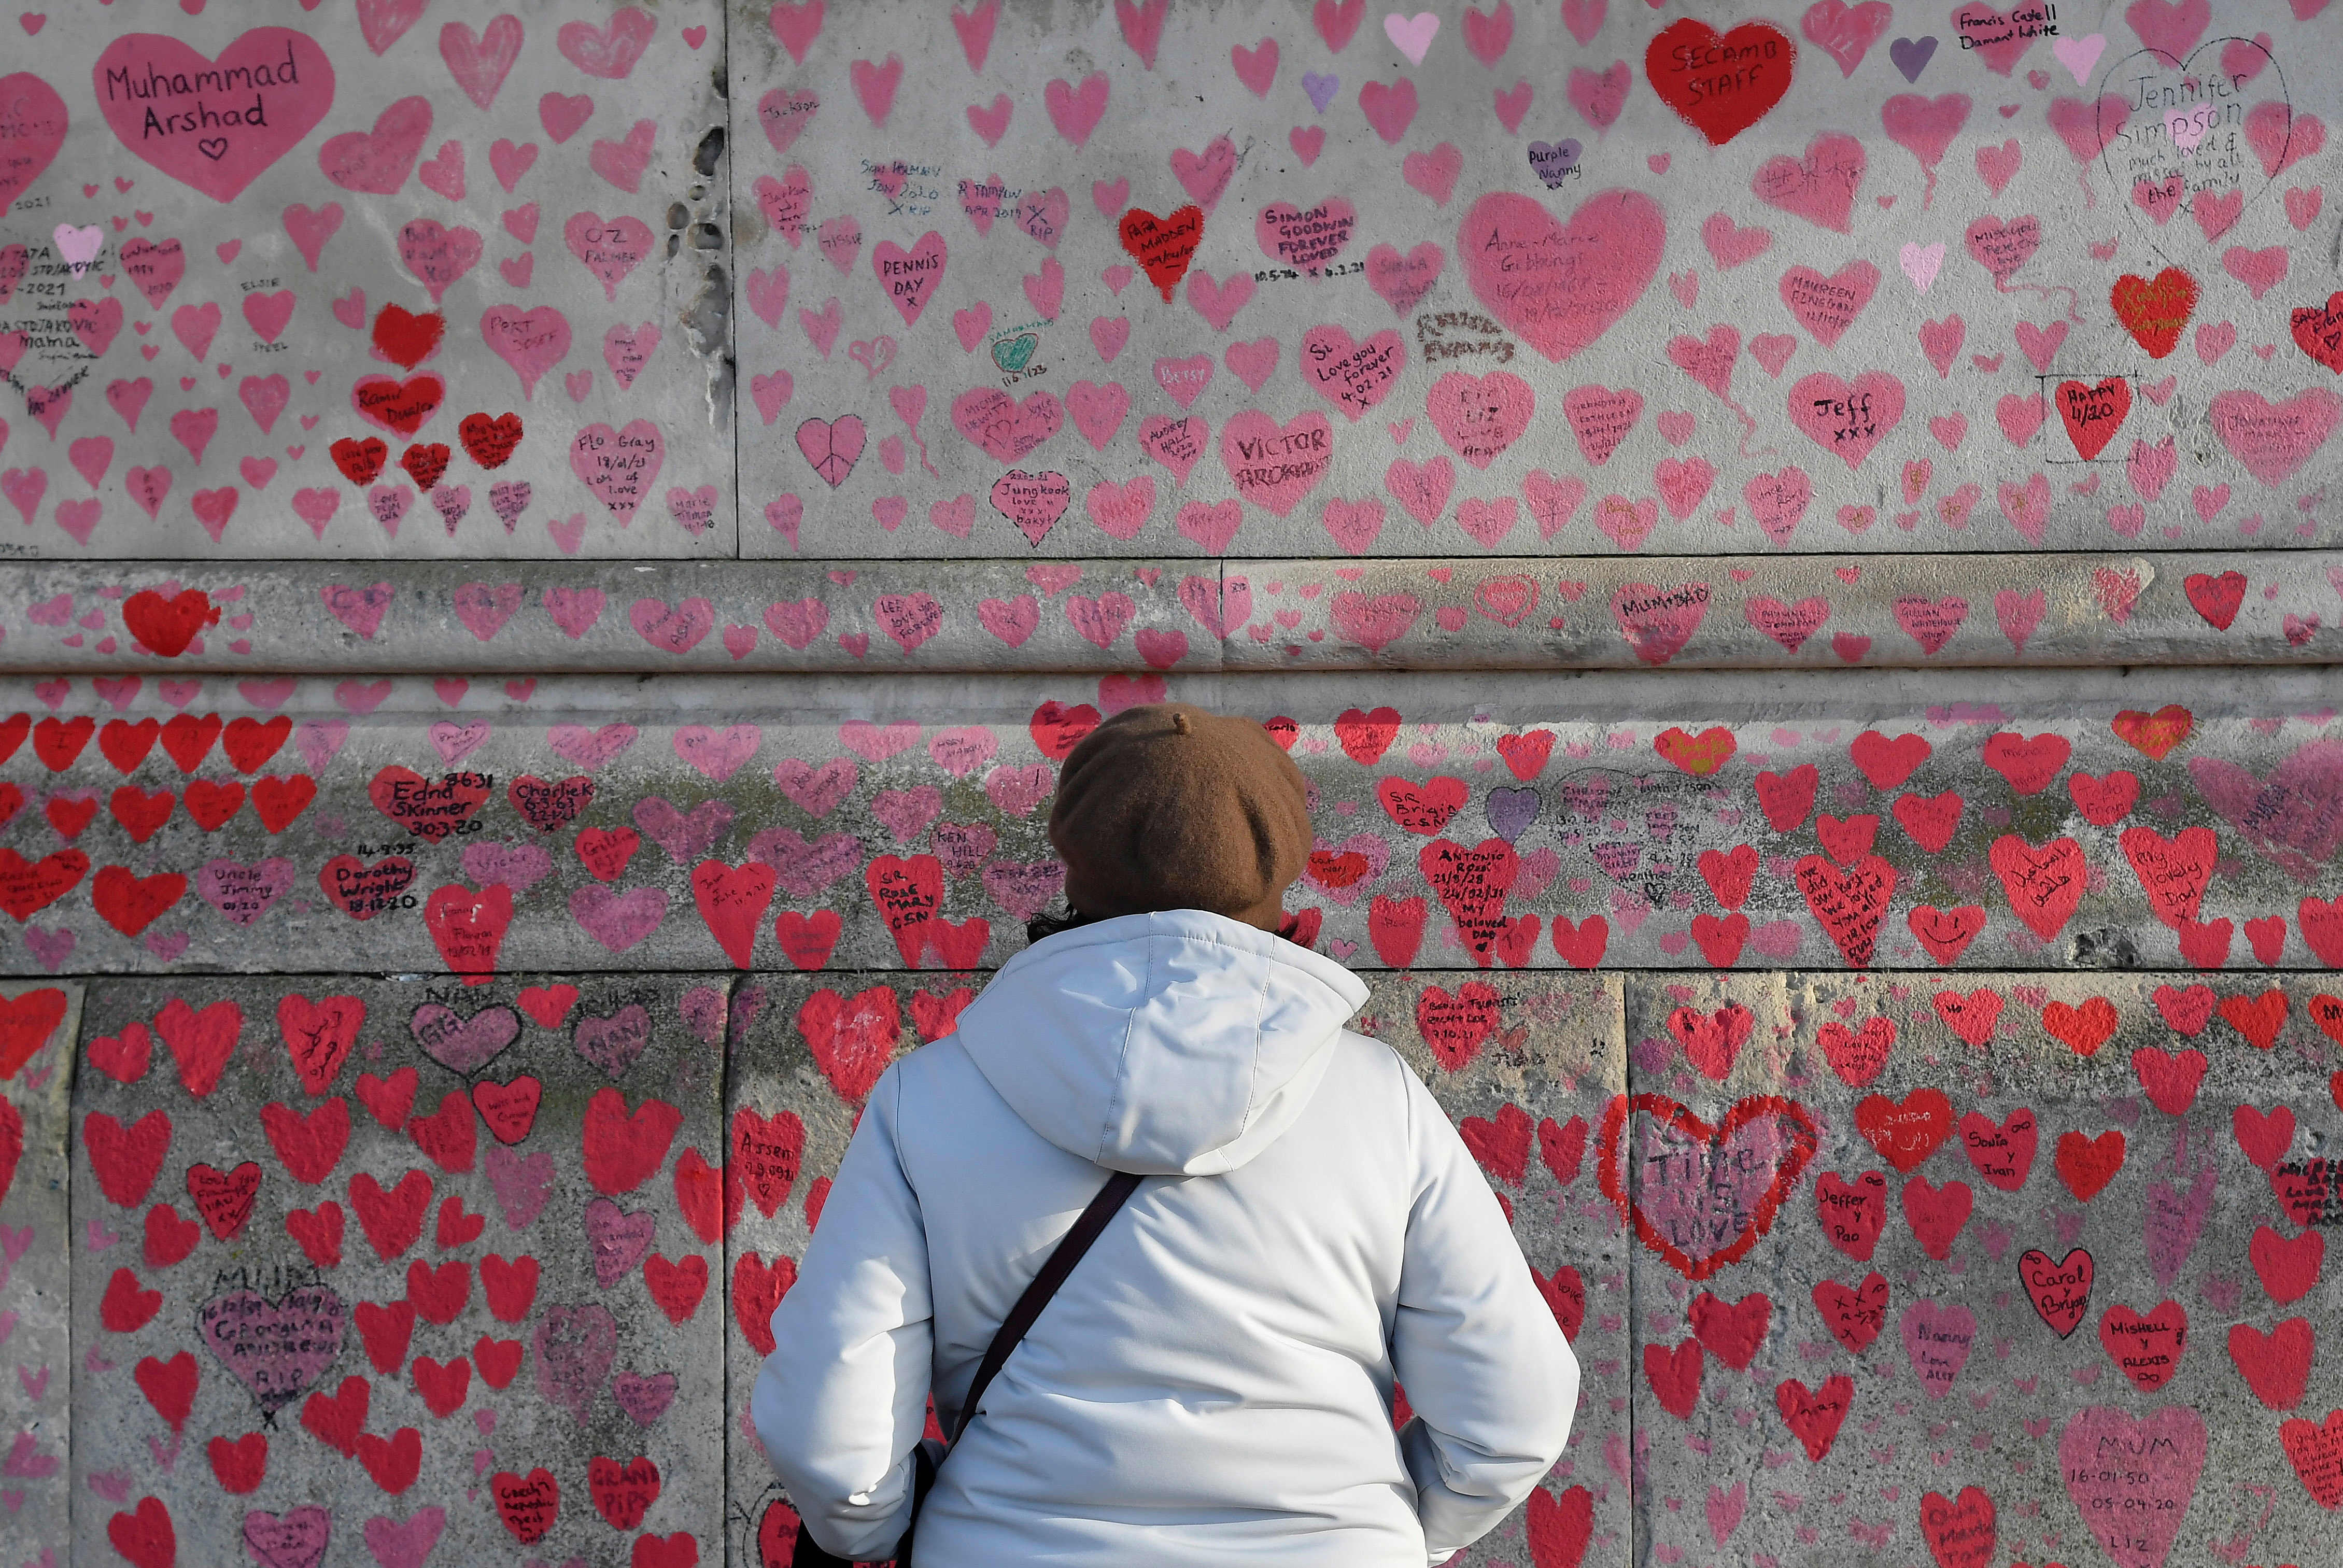 National Covid Memorial Wall, a dedication of thousands of hand-painted hearts and messages for those in the UK who have died from COVID-19, is seen amid the coronavirus disease pandemic in London